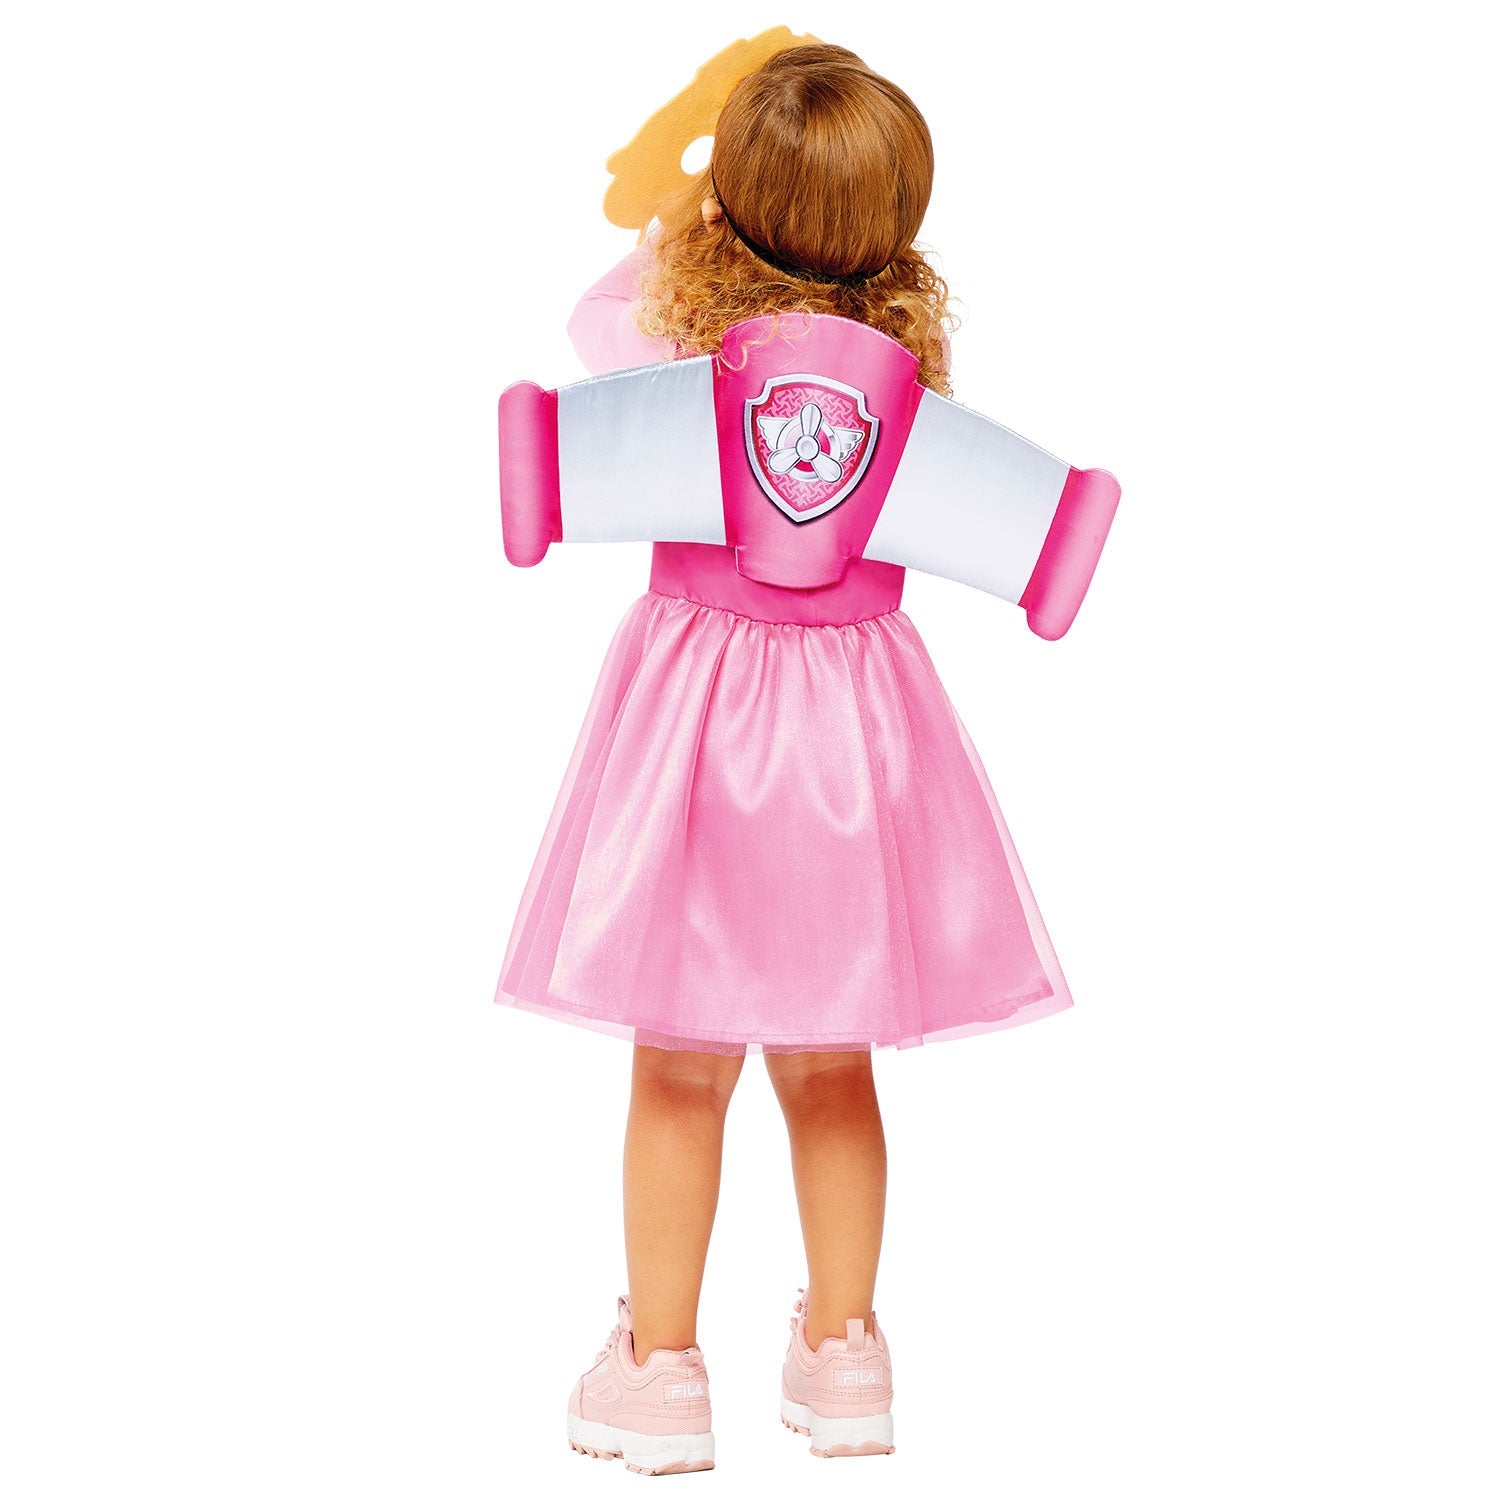 Paw Patrol Skye Costume includes dress, mask and wings